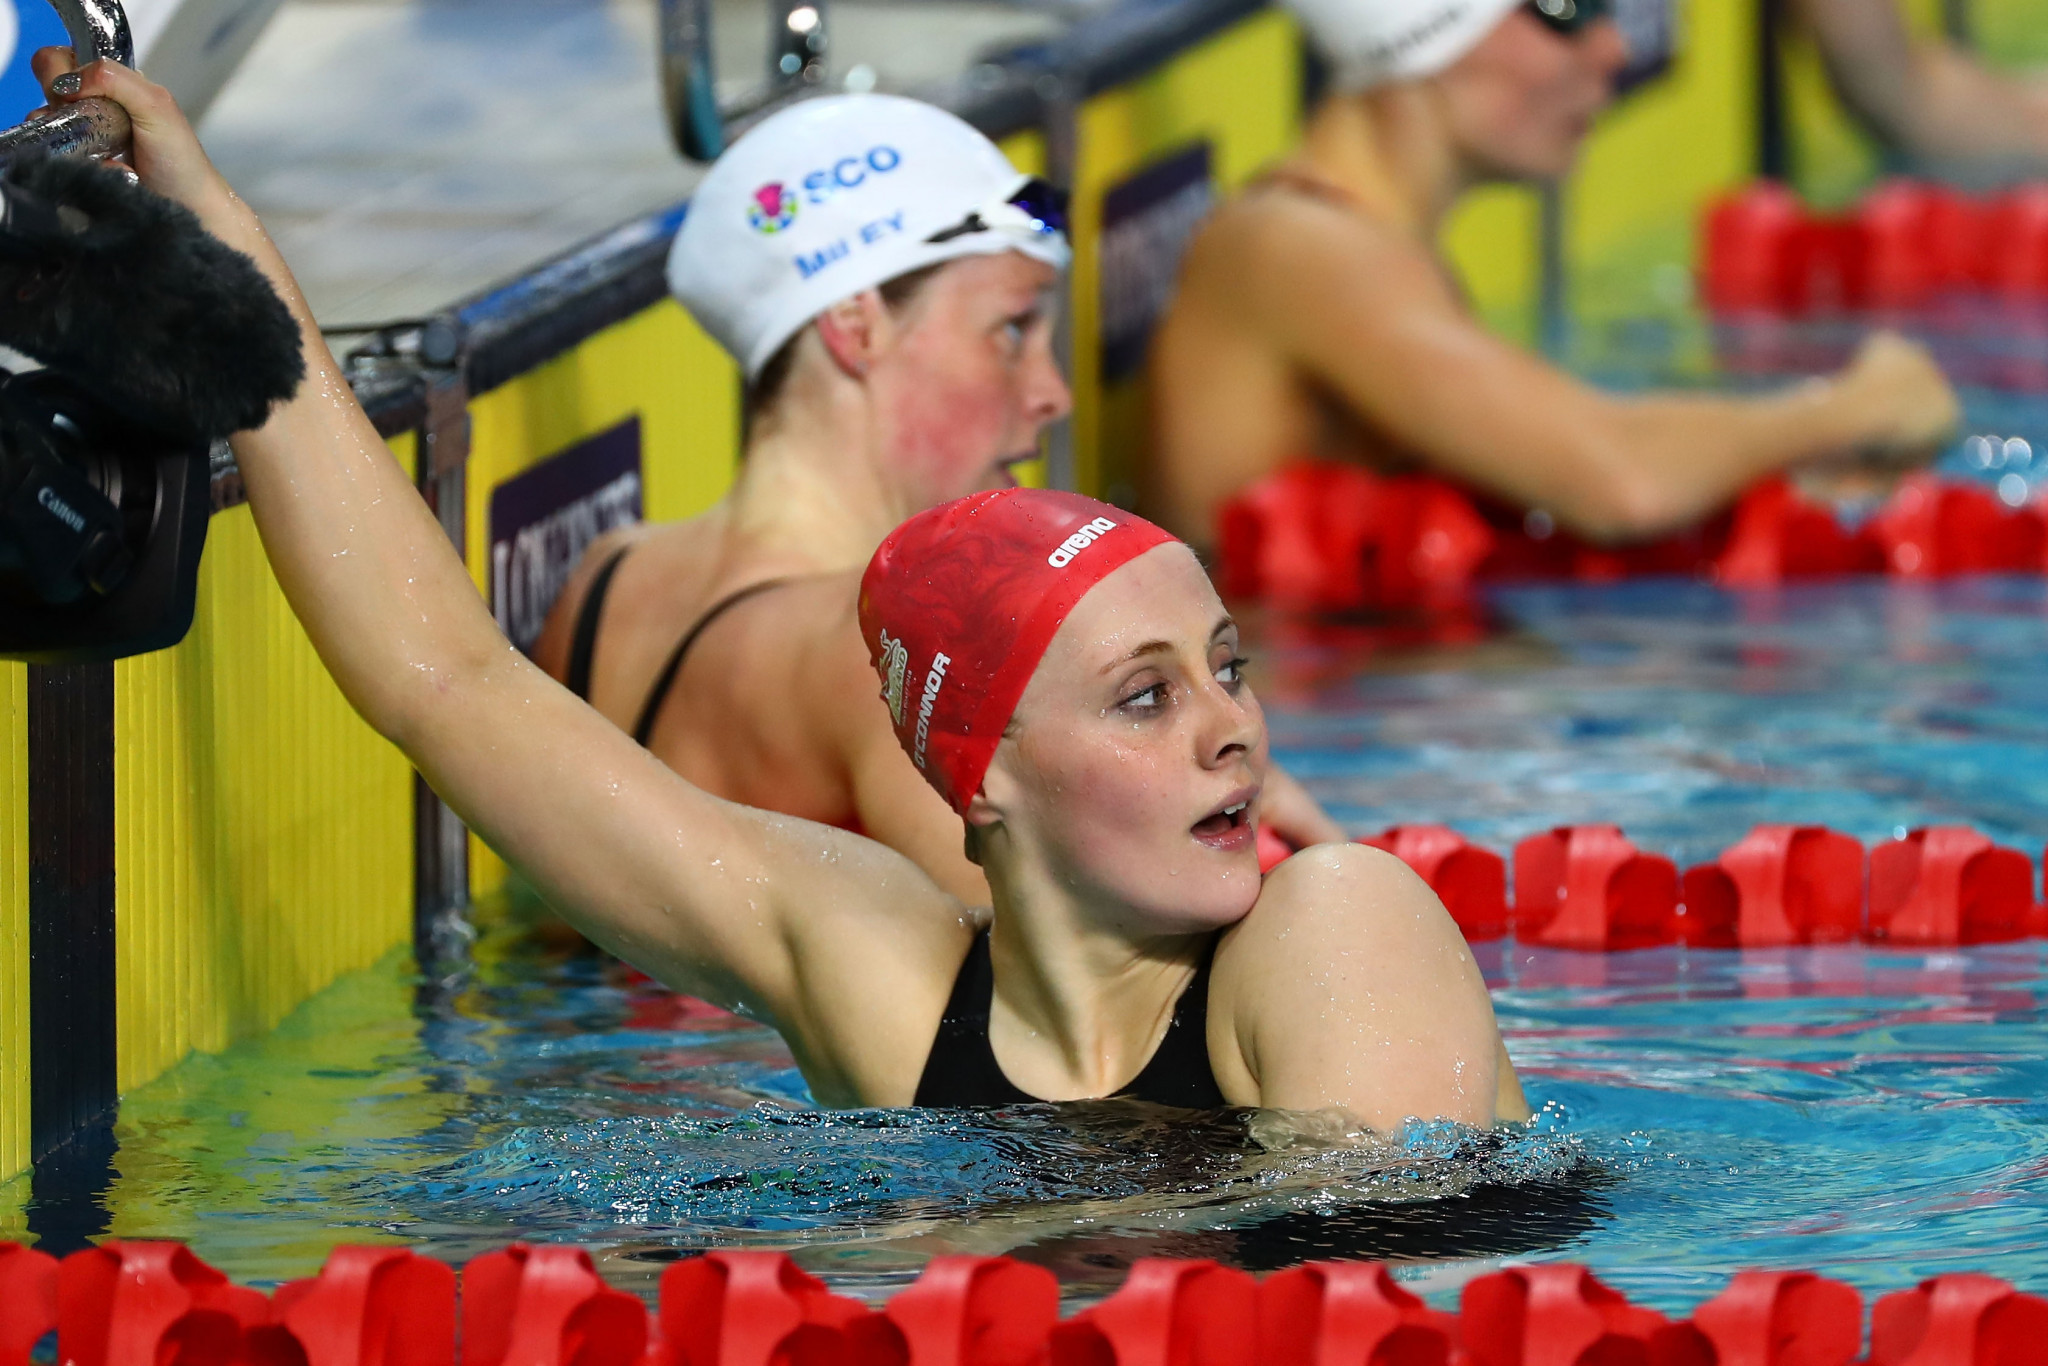 Siobhan-Marie O’Connor will be looking to secure more Commonwealth Games success at Birmingham 2022 after winning 200-metre medley gold at Gold Coast 2018 ©Getty Images